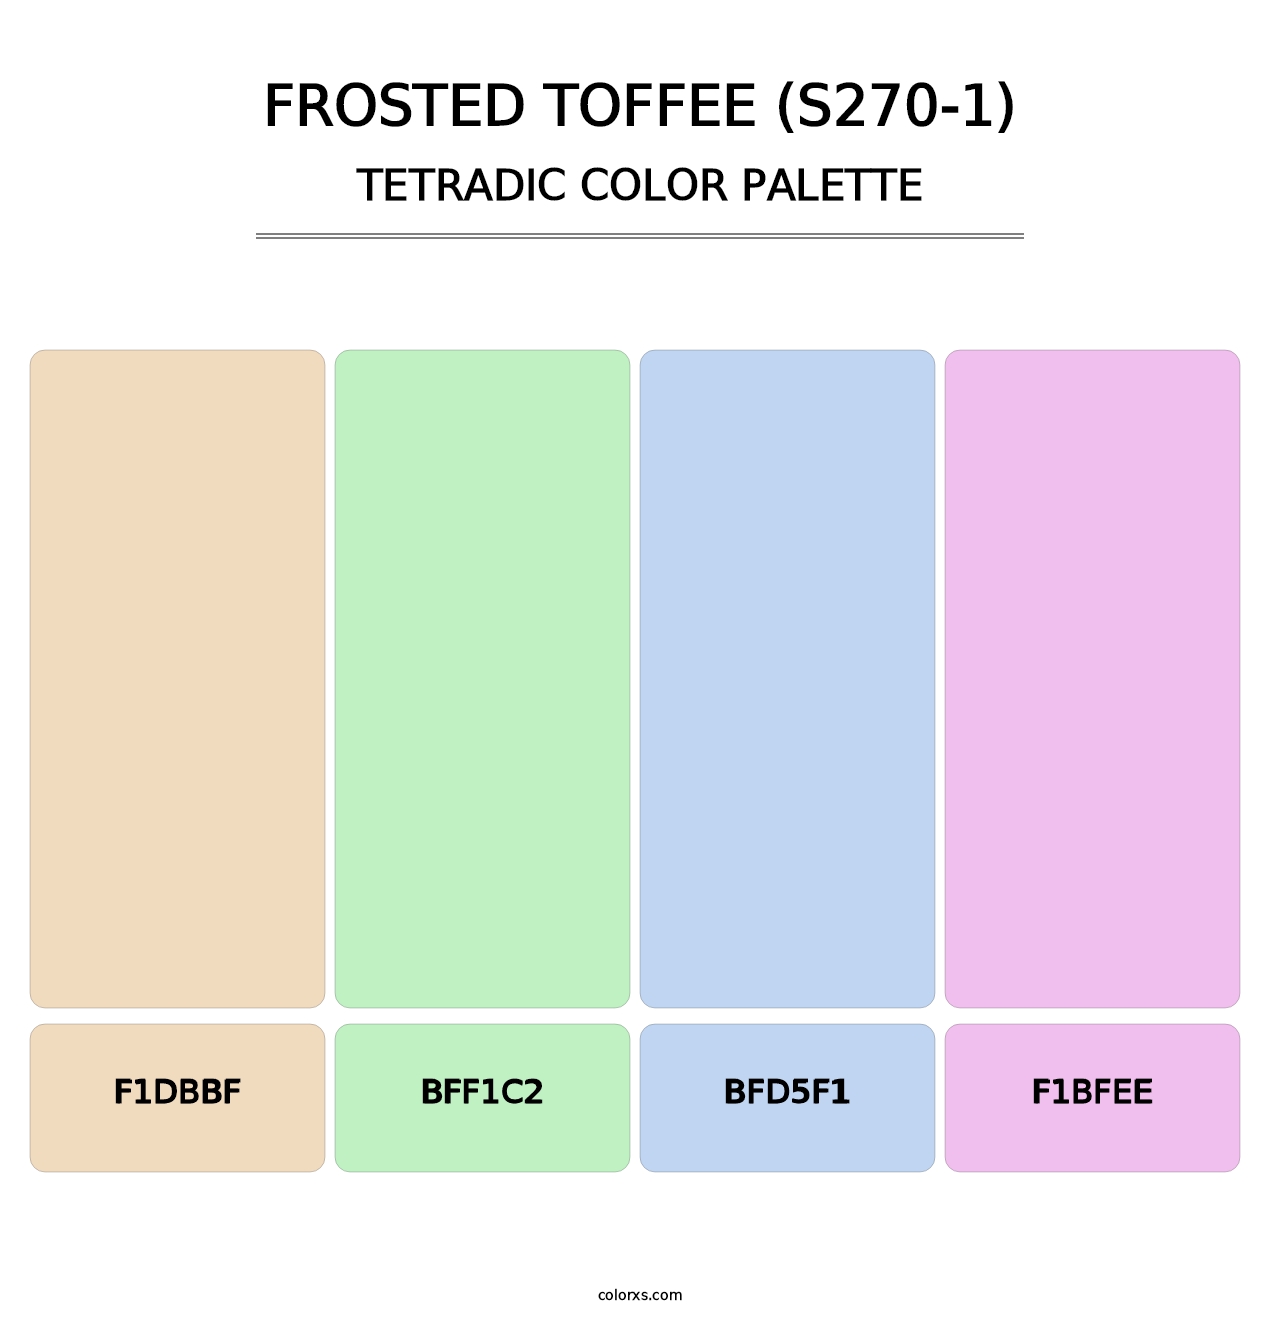 Frosted Toffee (S270-1) - Tetradic Color Palette